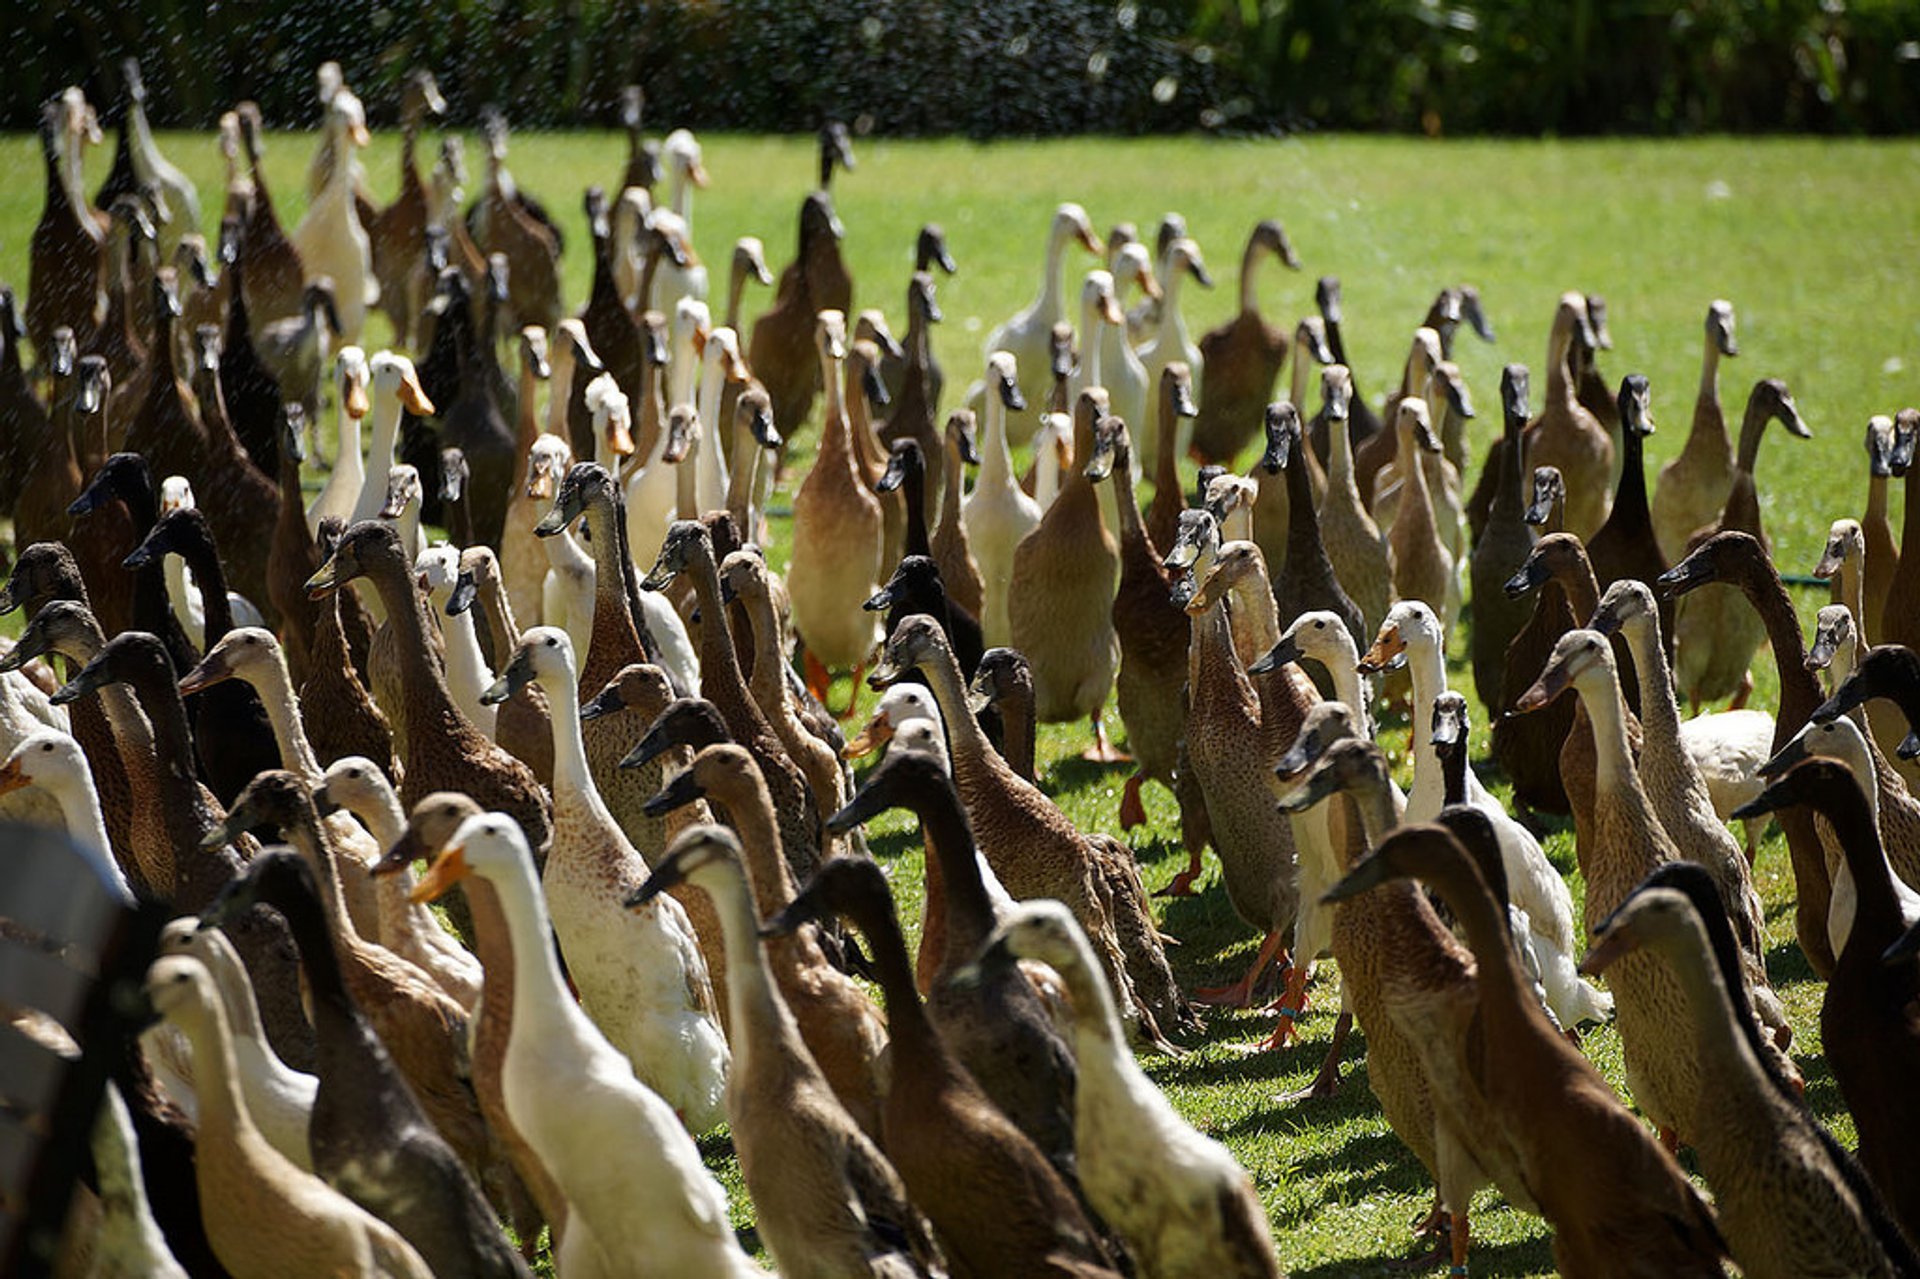 The Army of Ducks